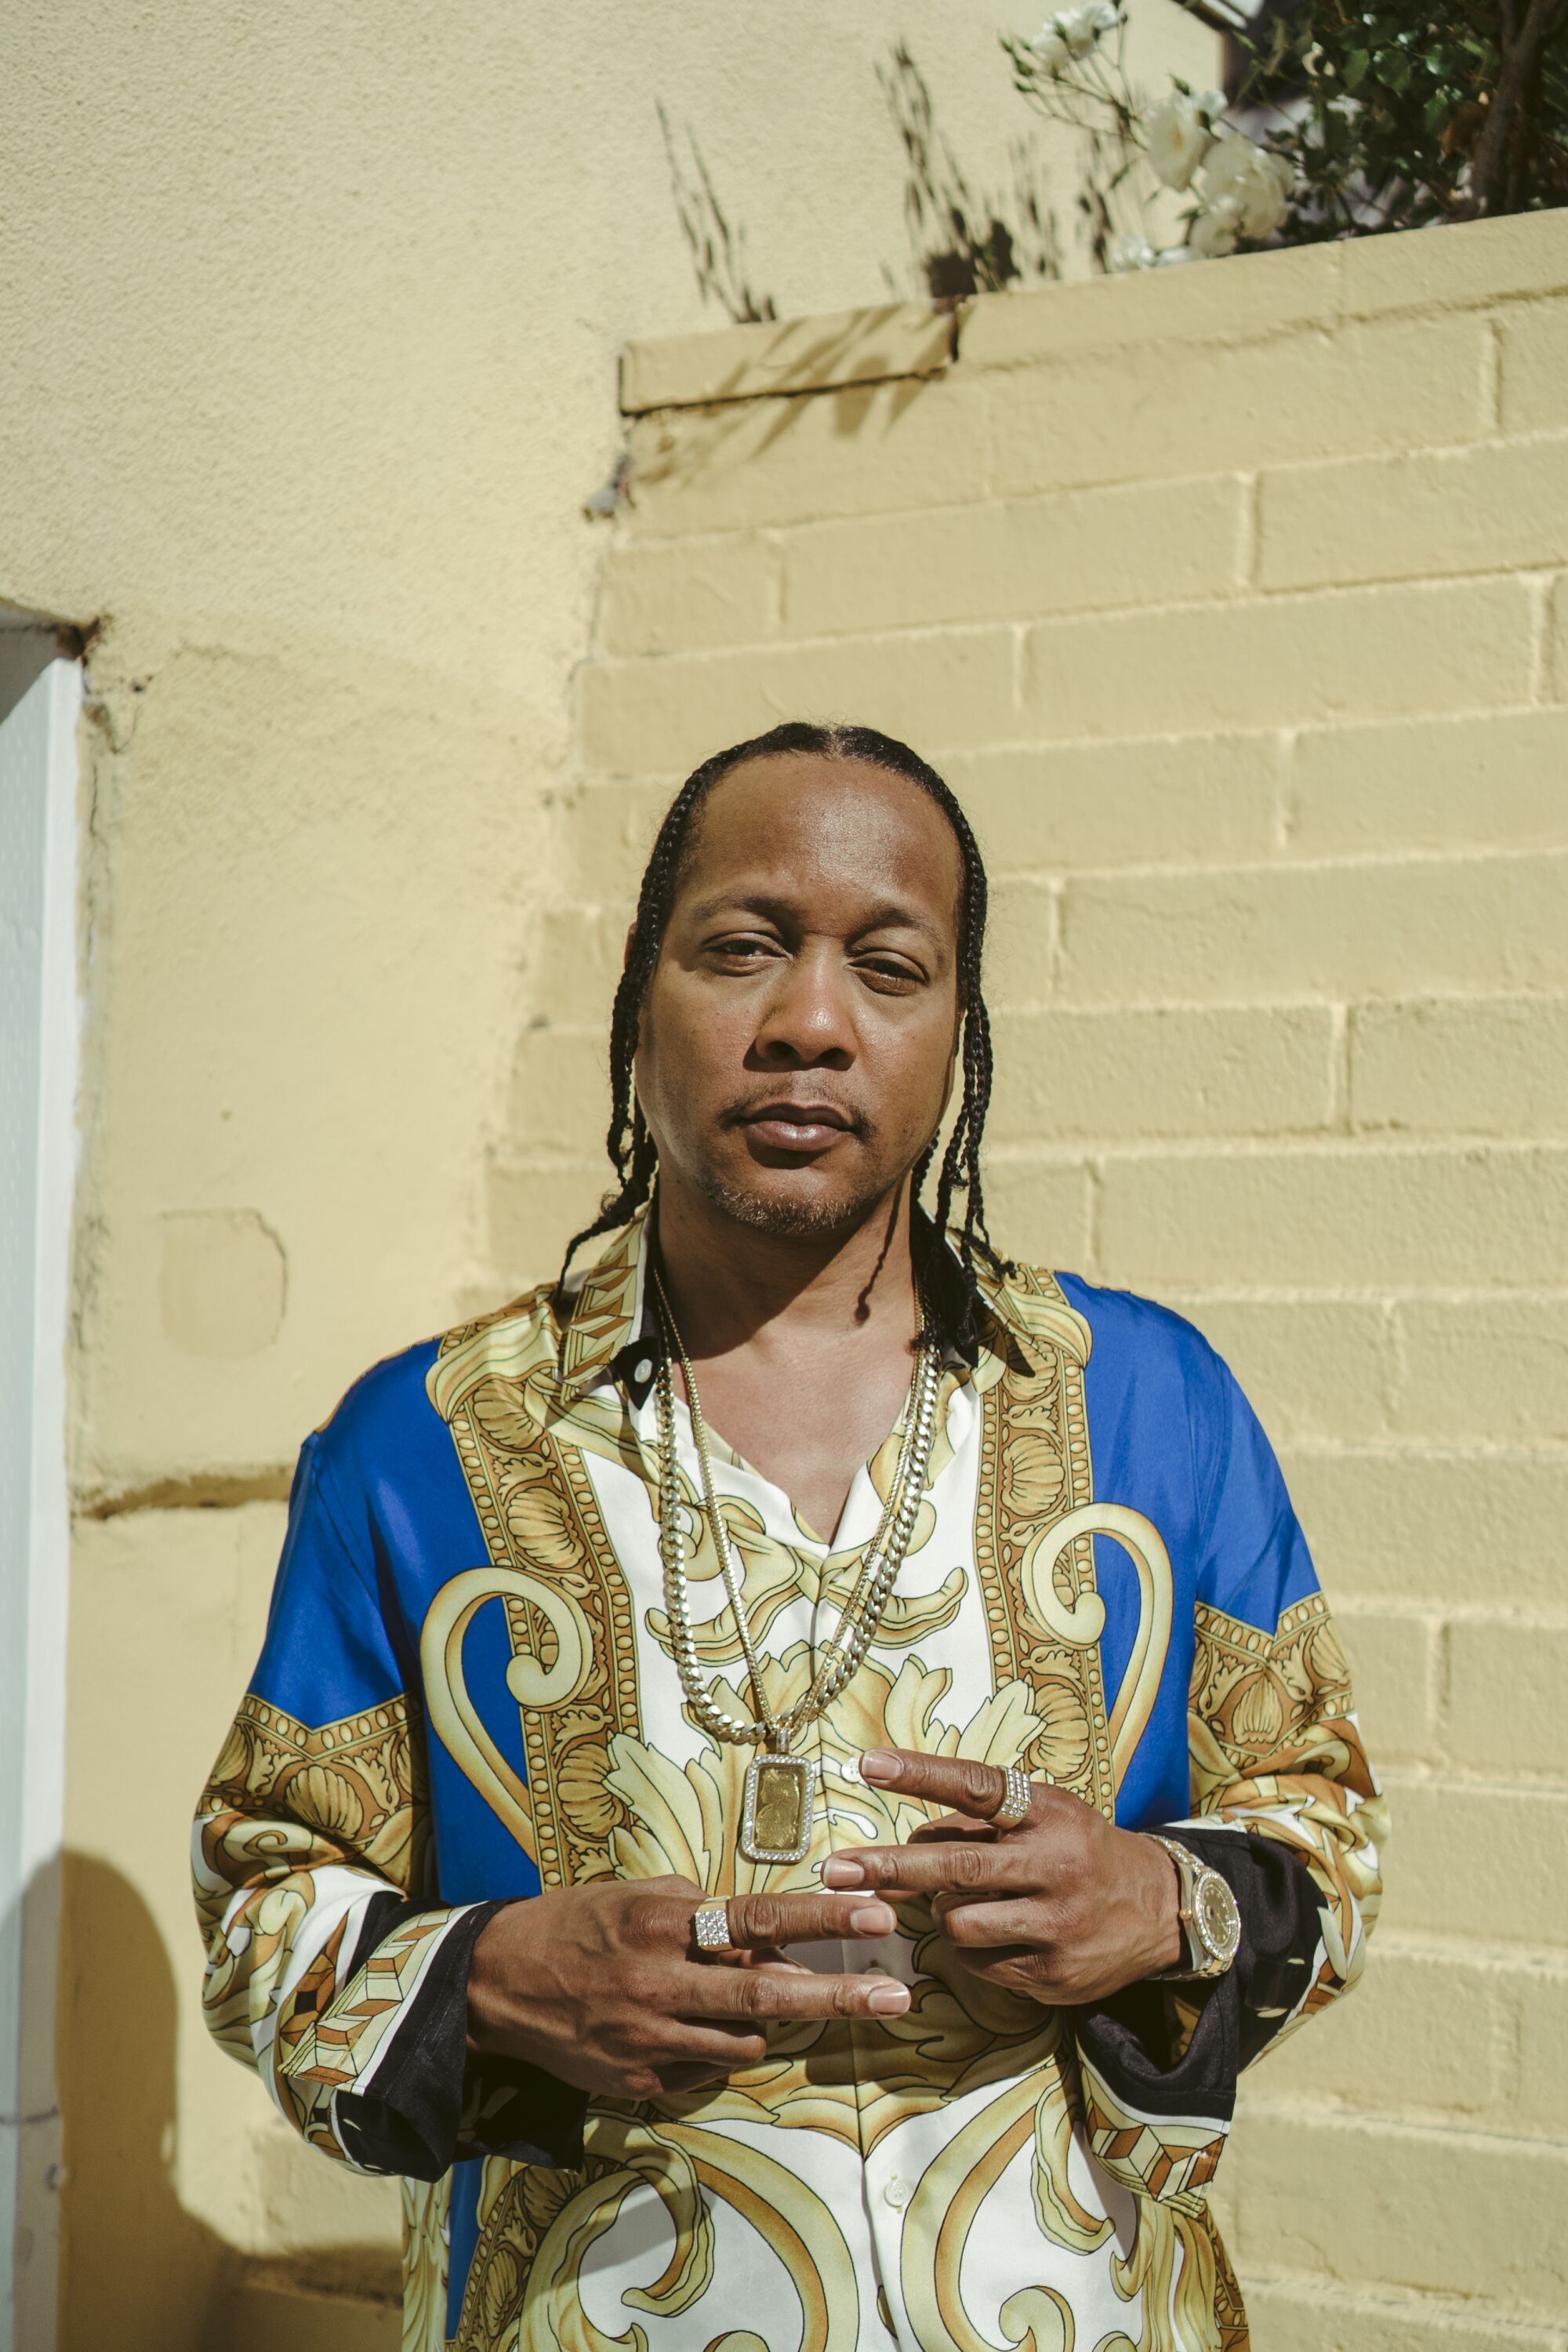 When it comes to L.A. sound, DJ Quik is still the name Los Angeles Times